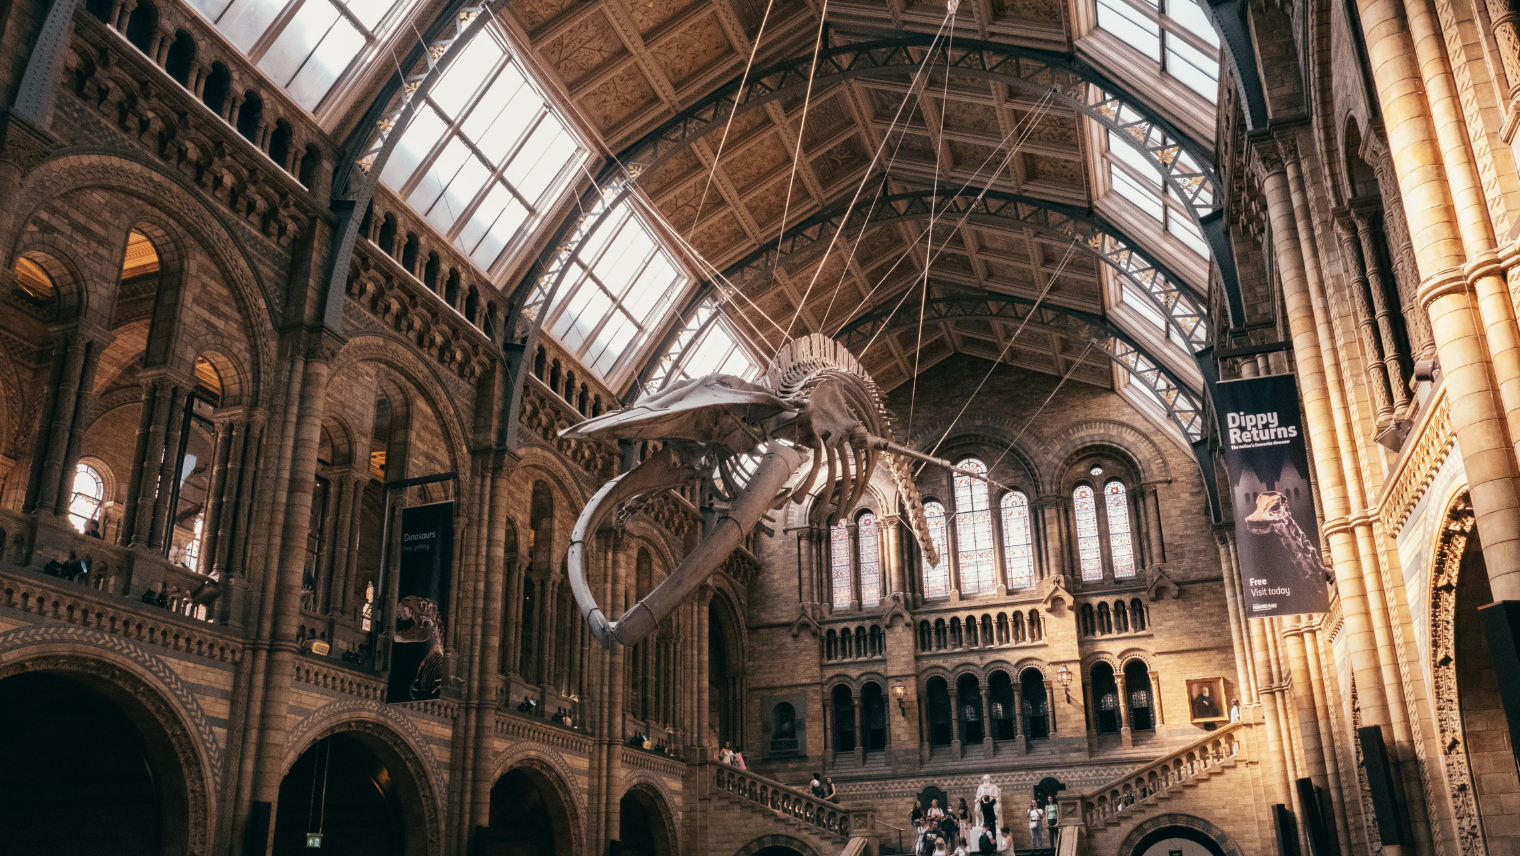 An image of a skeleton suspended from the ceiling at London's Natural History Museum